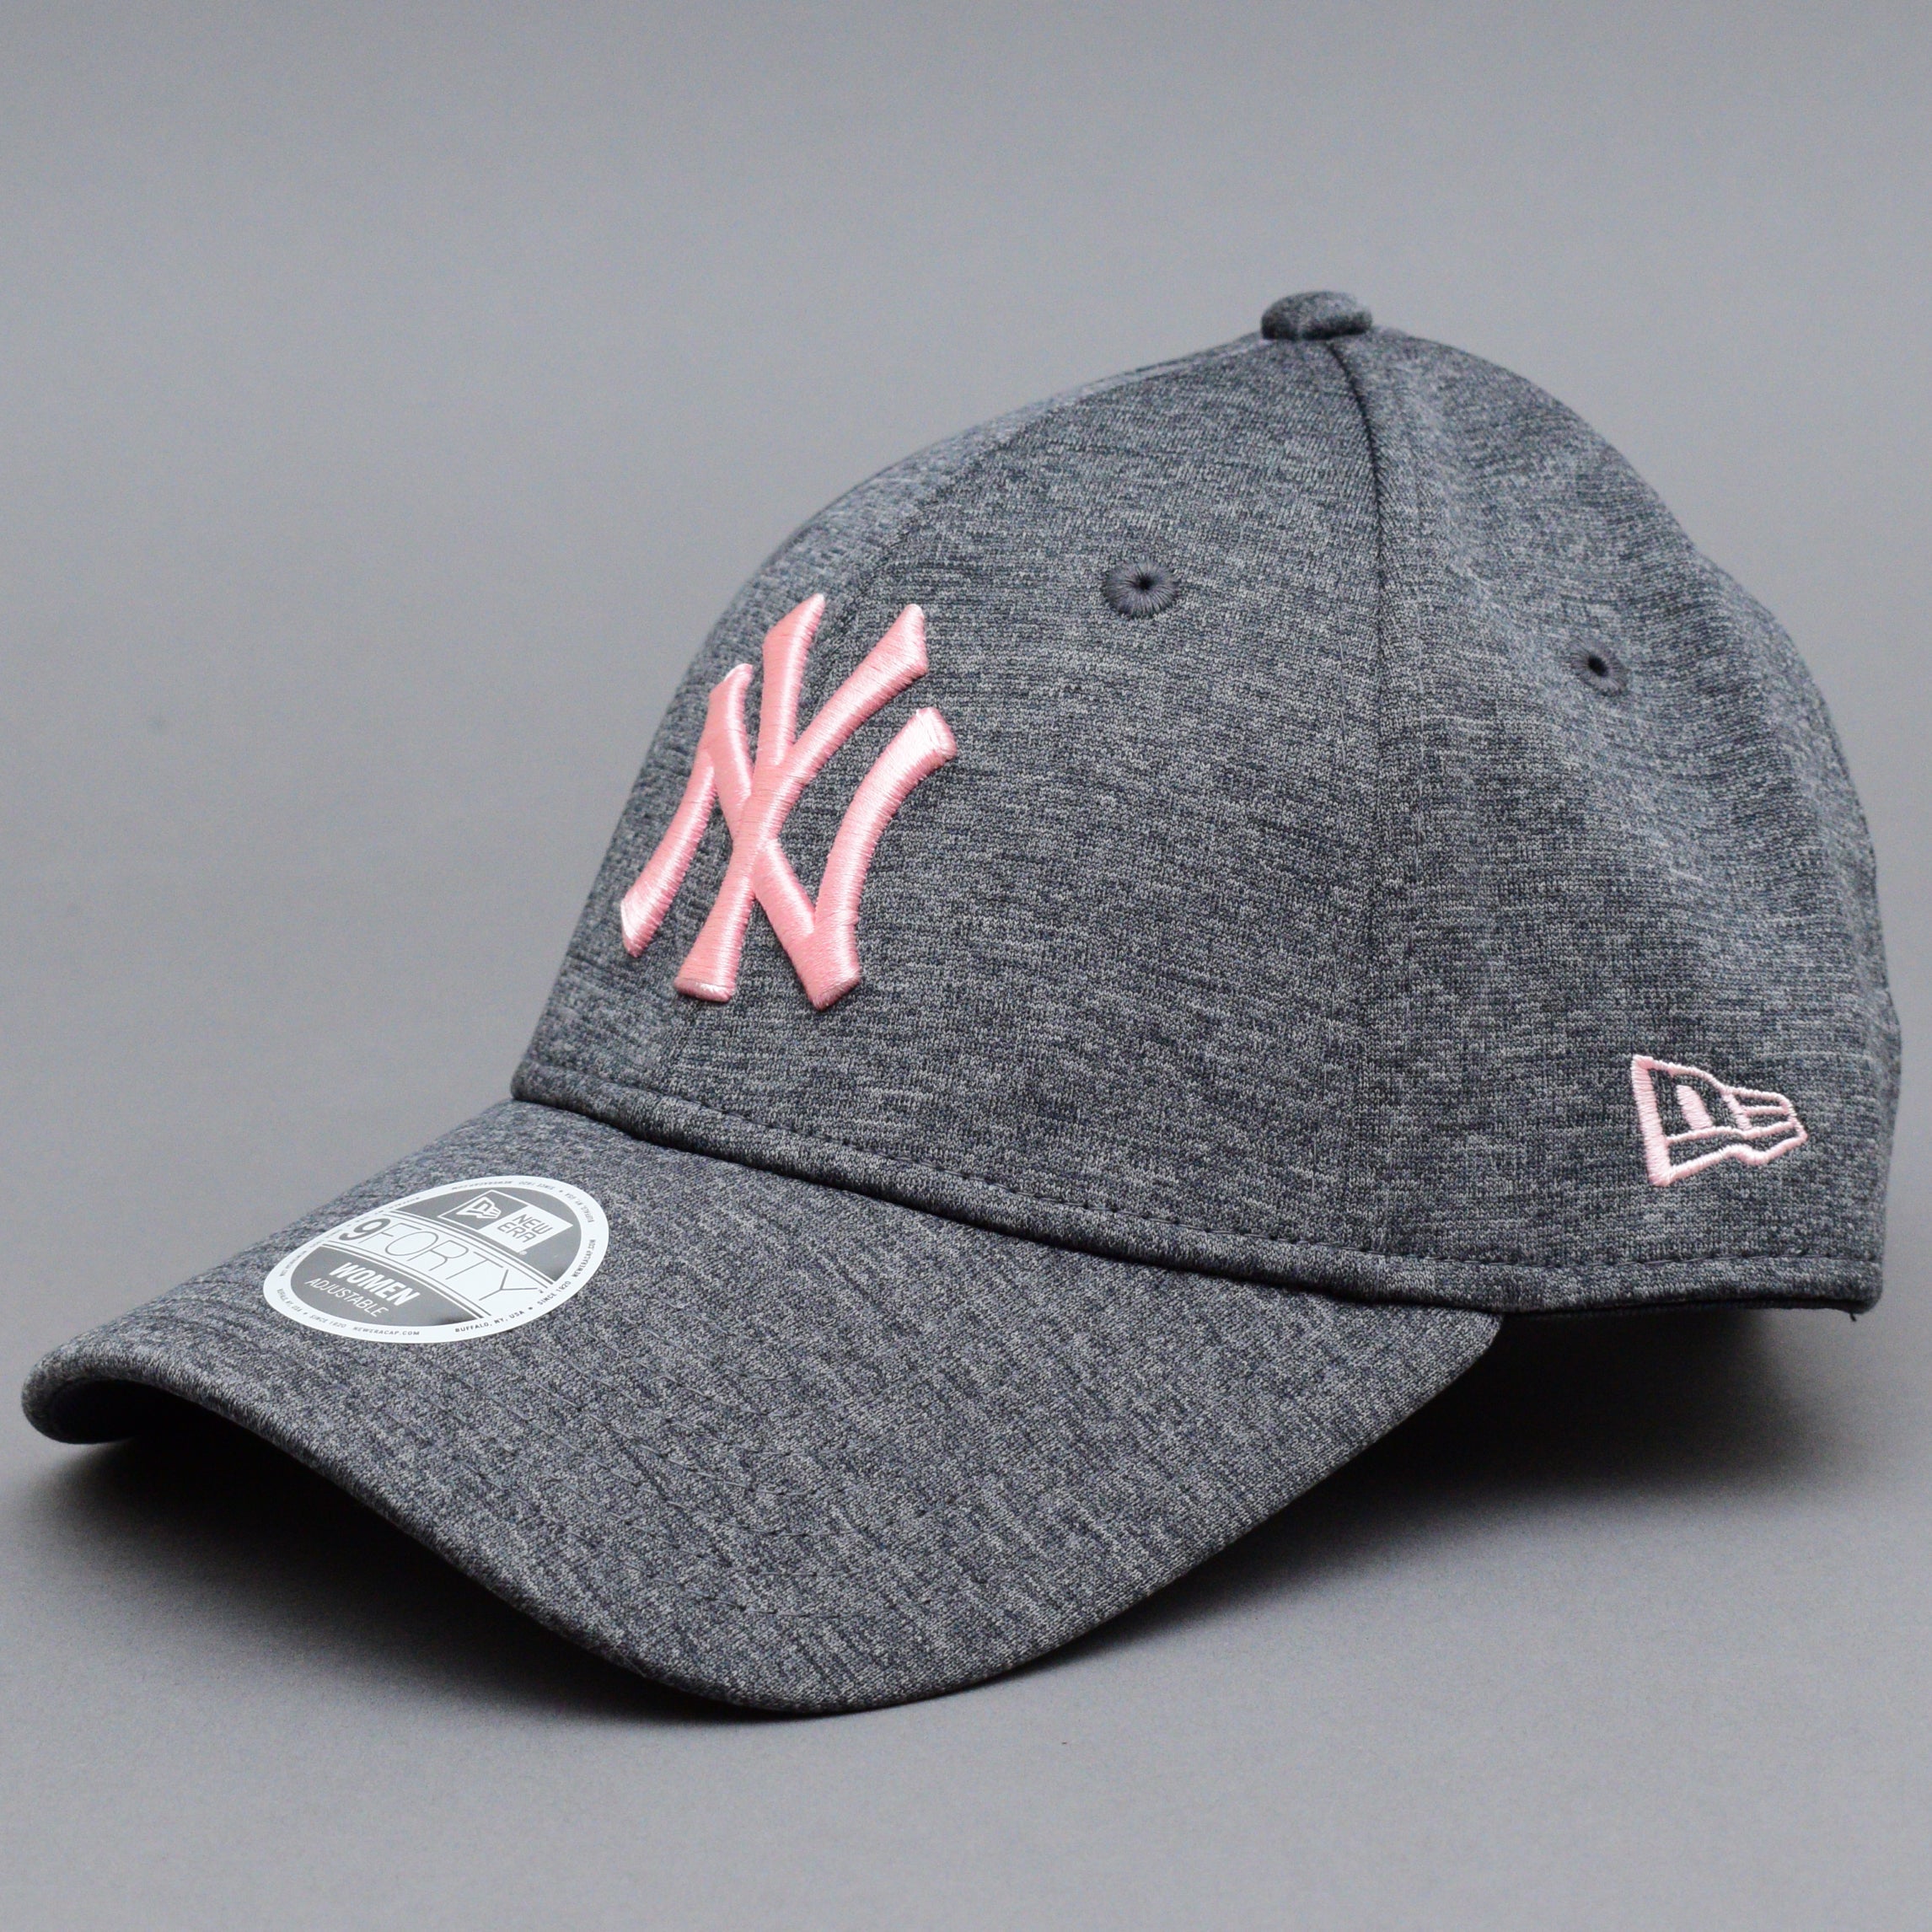 New Era - NY Yankees Tech Jersey 9Forty Women - Adjustable - Grey/Pink